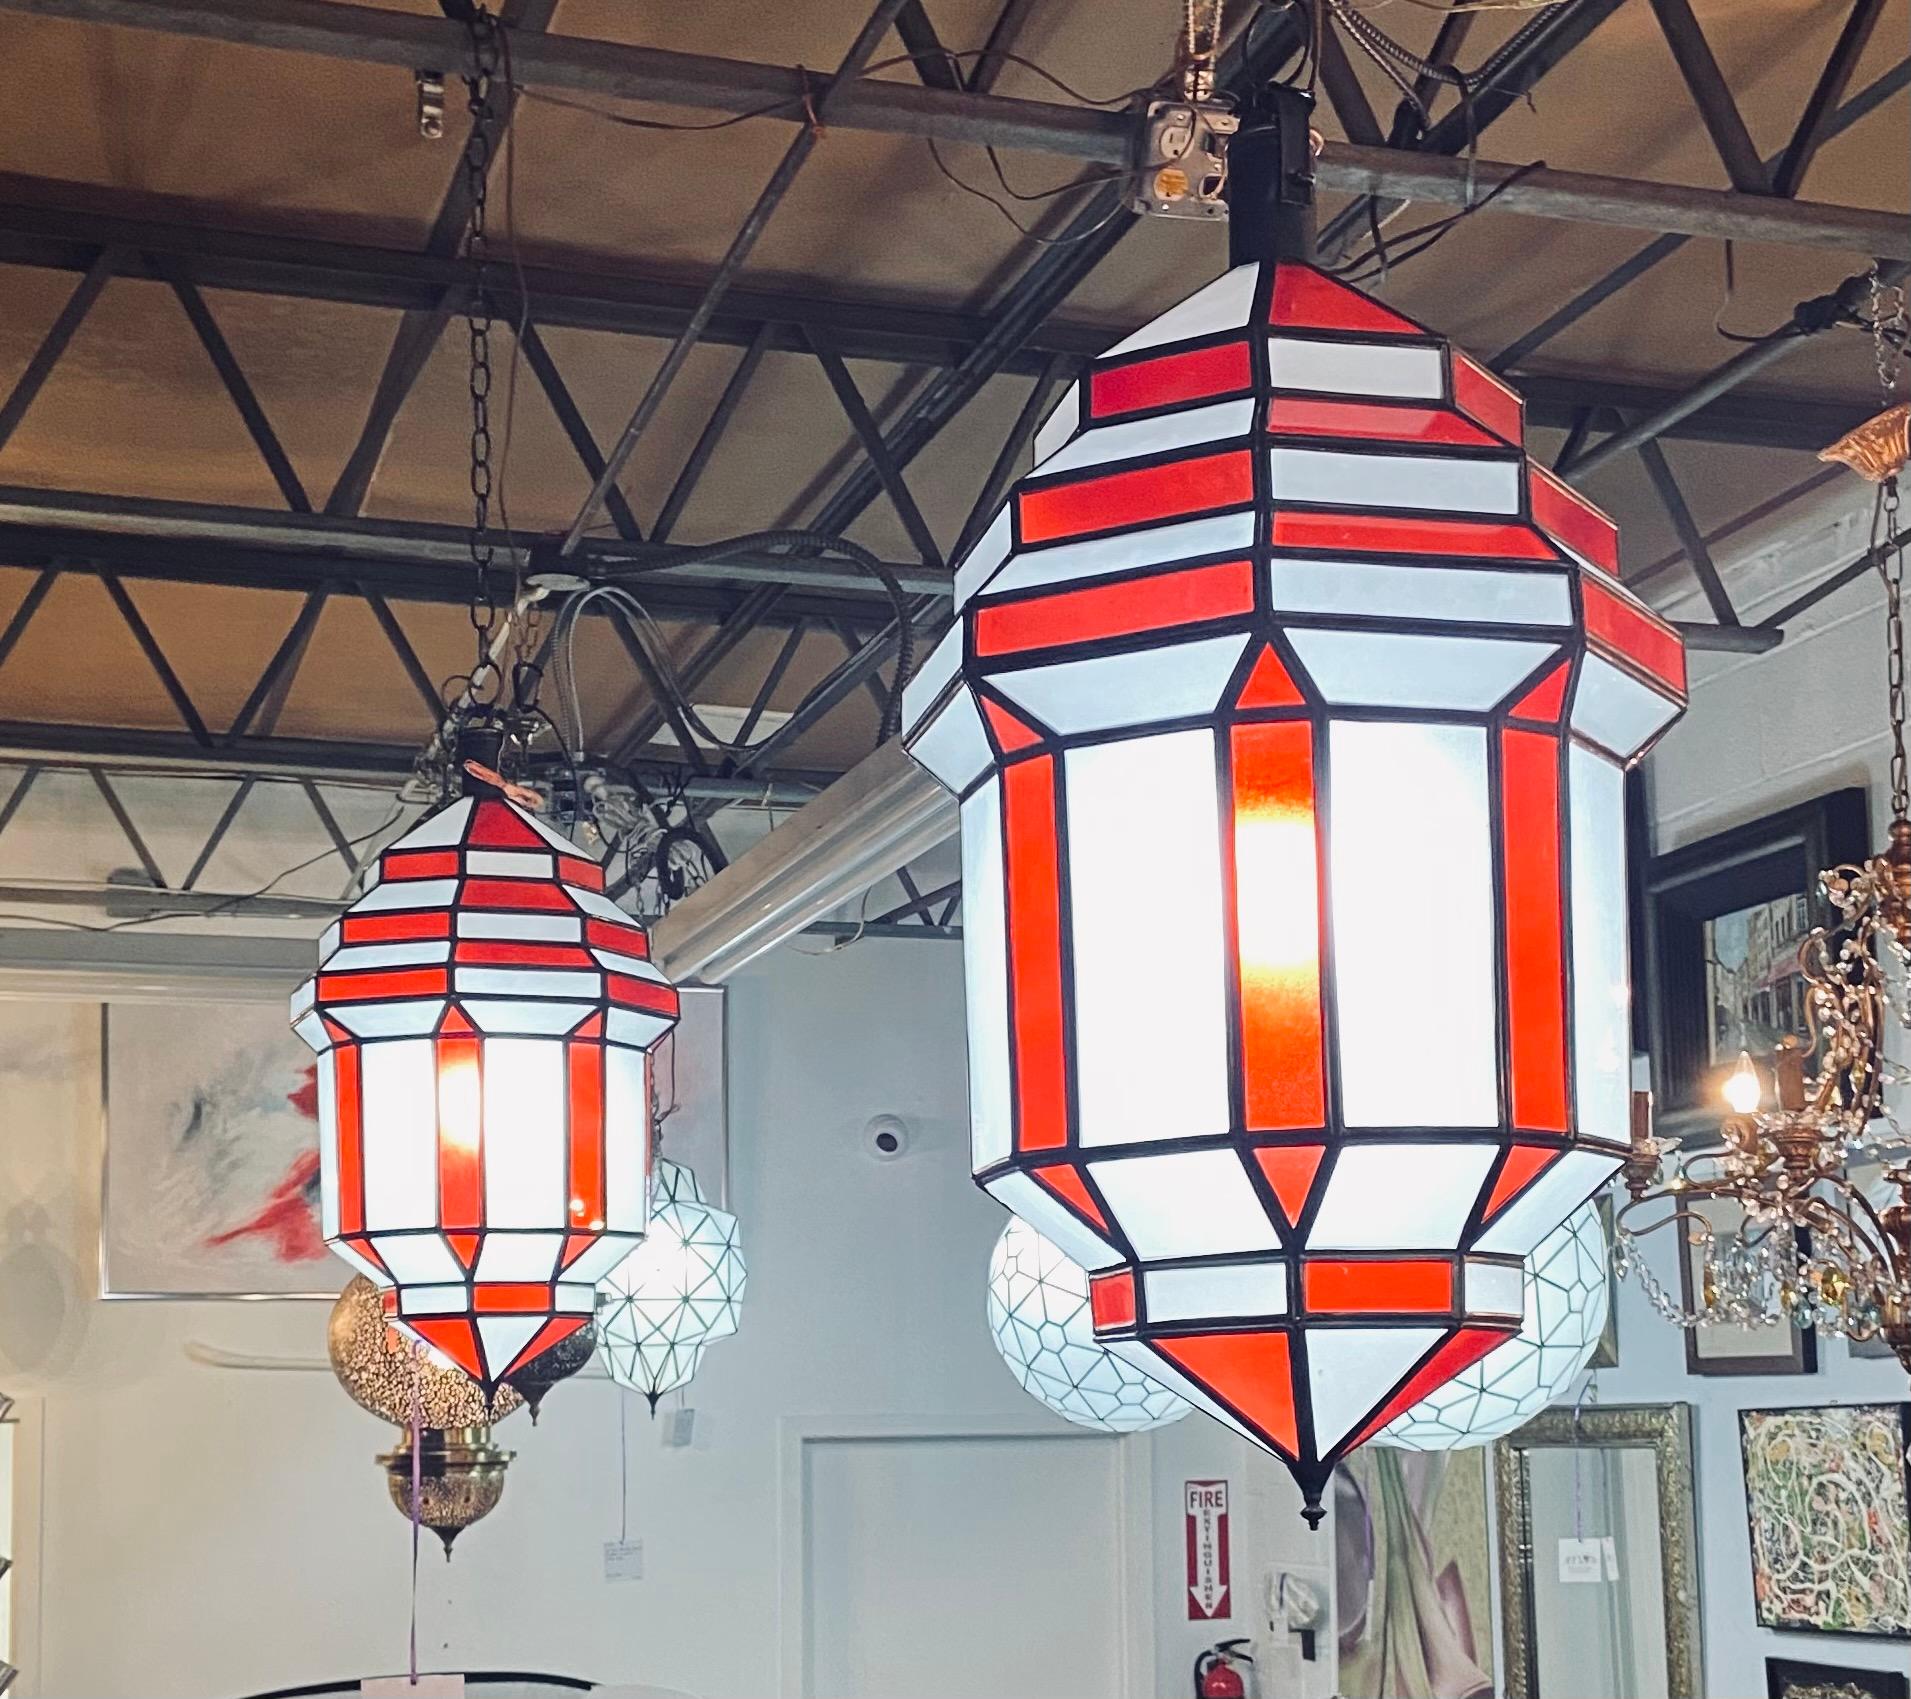 Art Deco style white milk and red glass chandelier, pendant or lantern, a pair
A gorgeous handcrafted, having individual panes, pair of Art Deco hanging lanterns or ceiling fixtures featuring sandblasted frosted milky white and red glass and